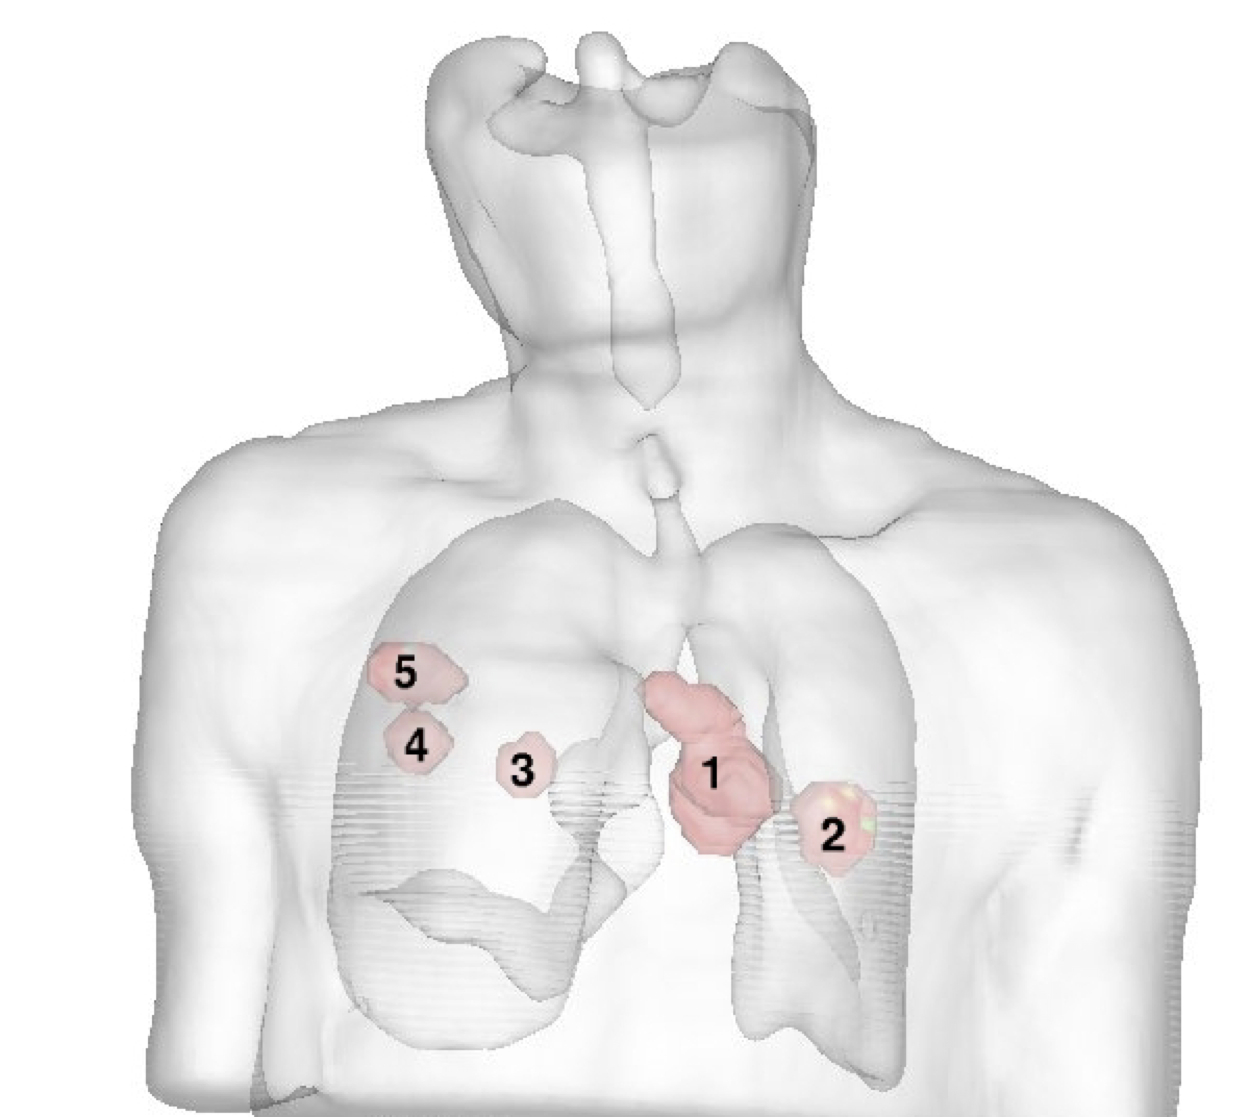 Multiple lung lesions rendering